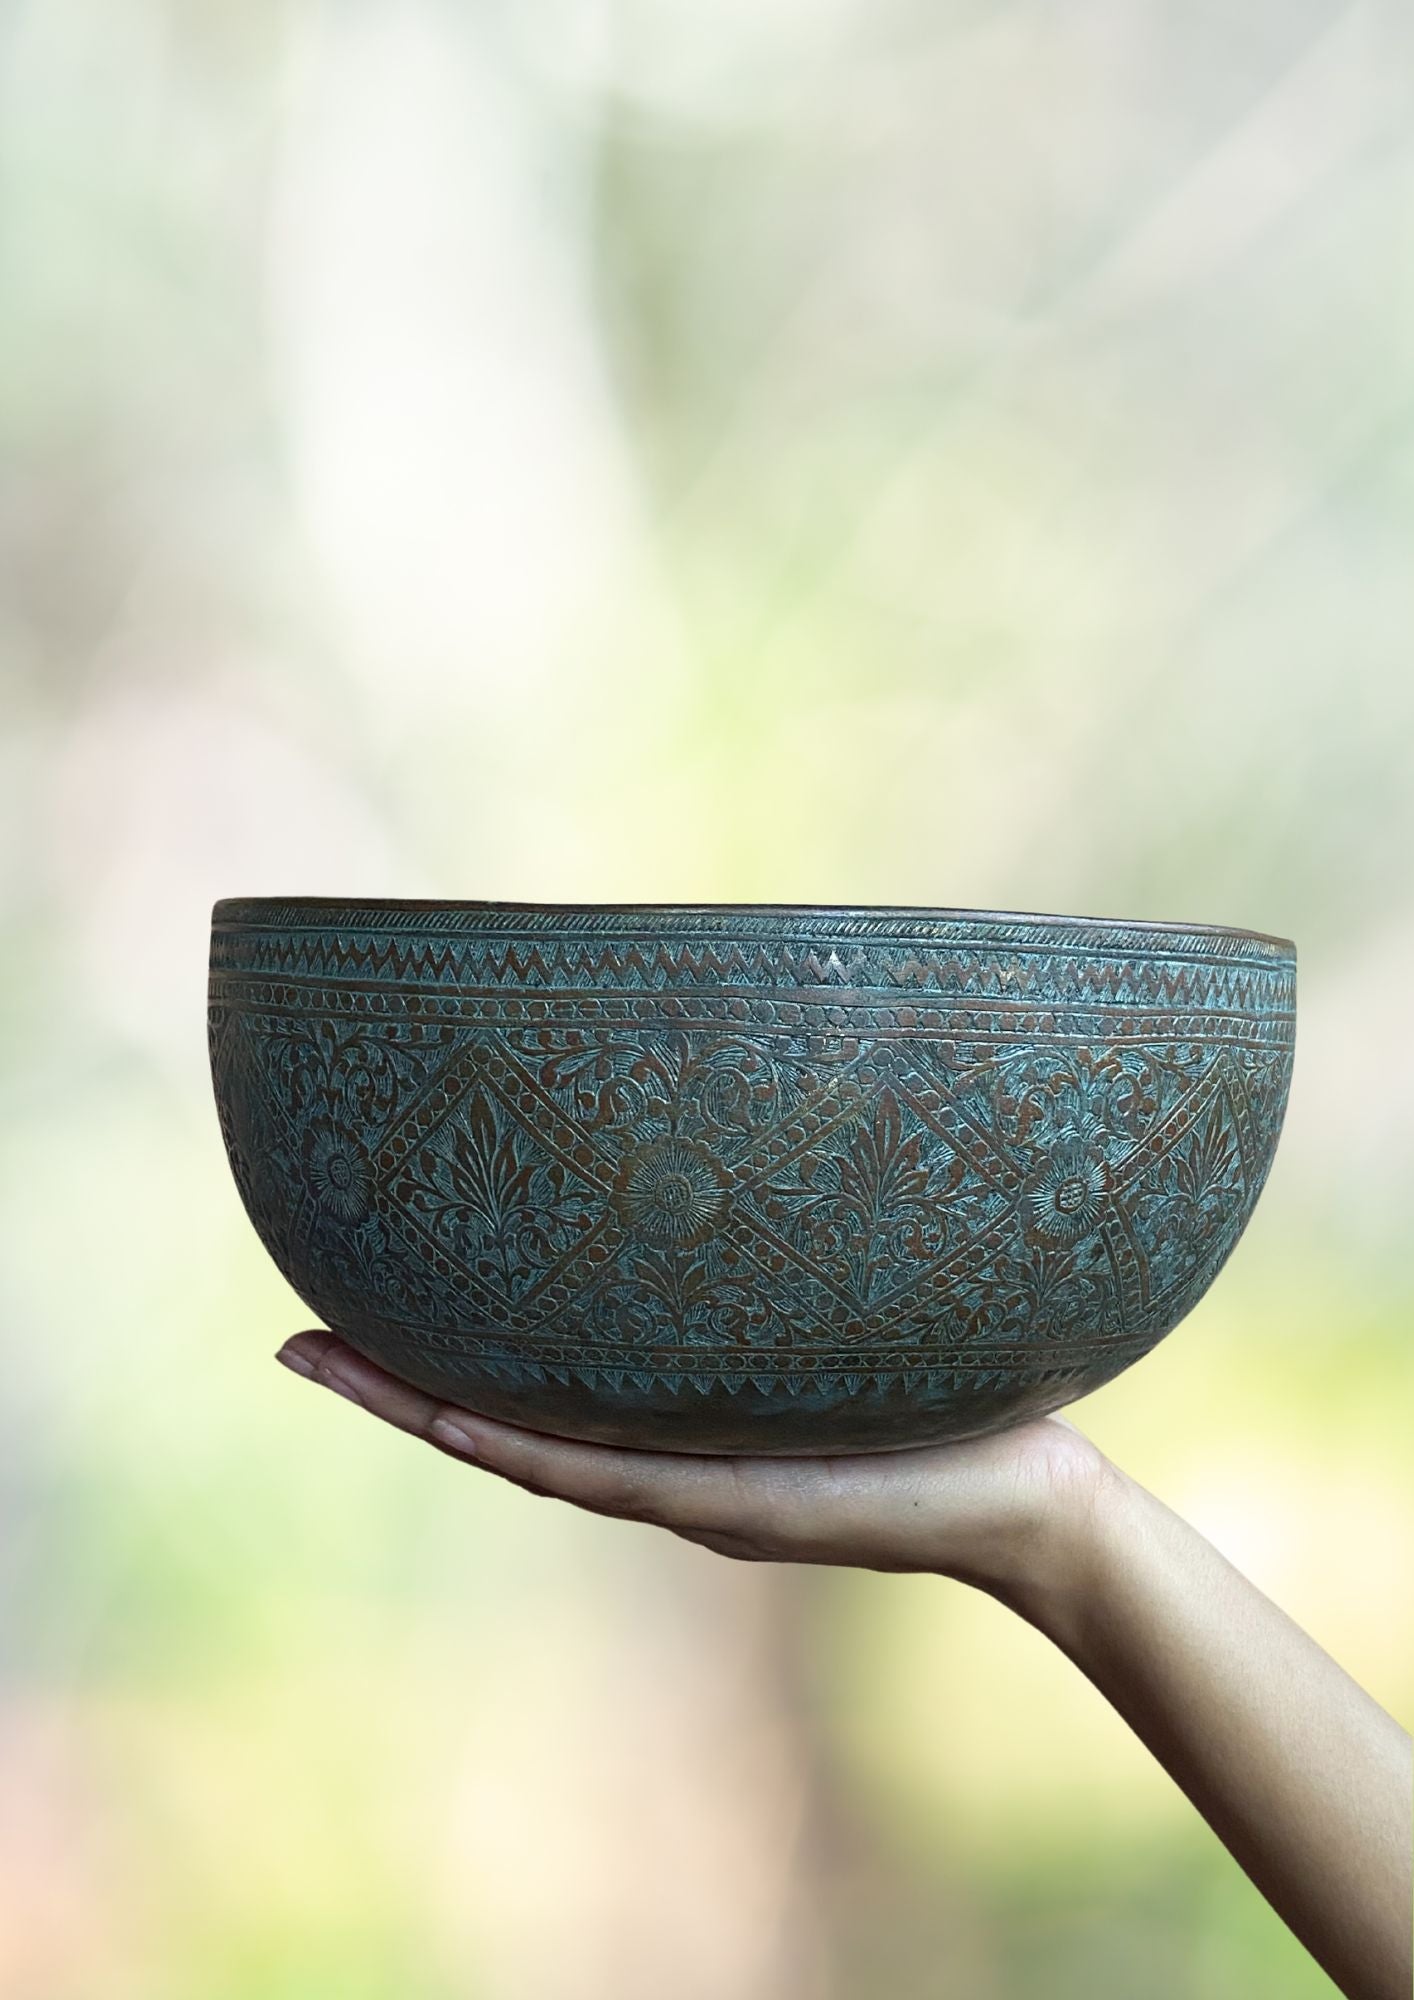 Jambati Bowl - Antique Bowl with deep carving work for sound healing